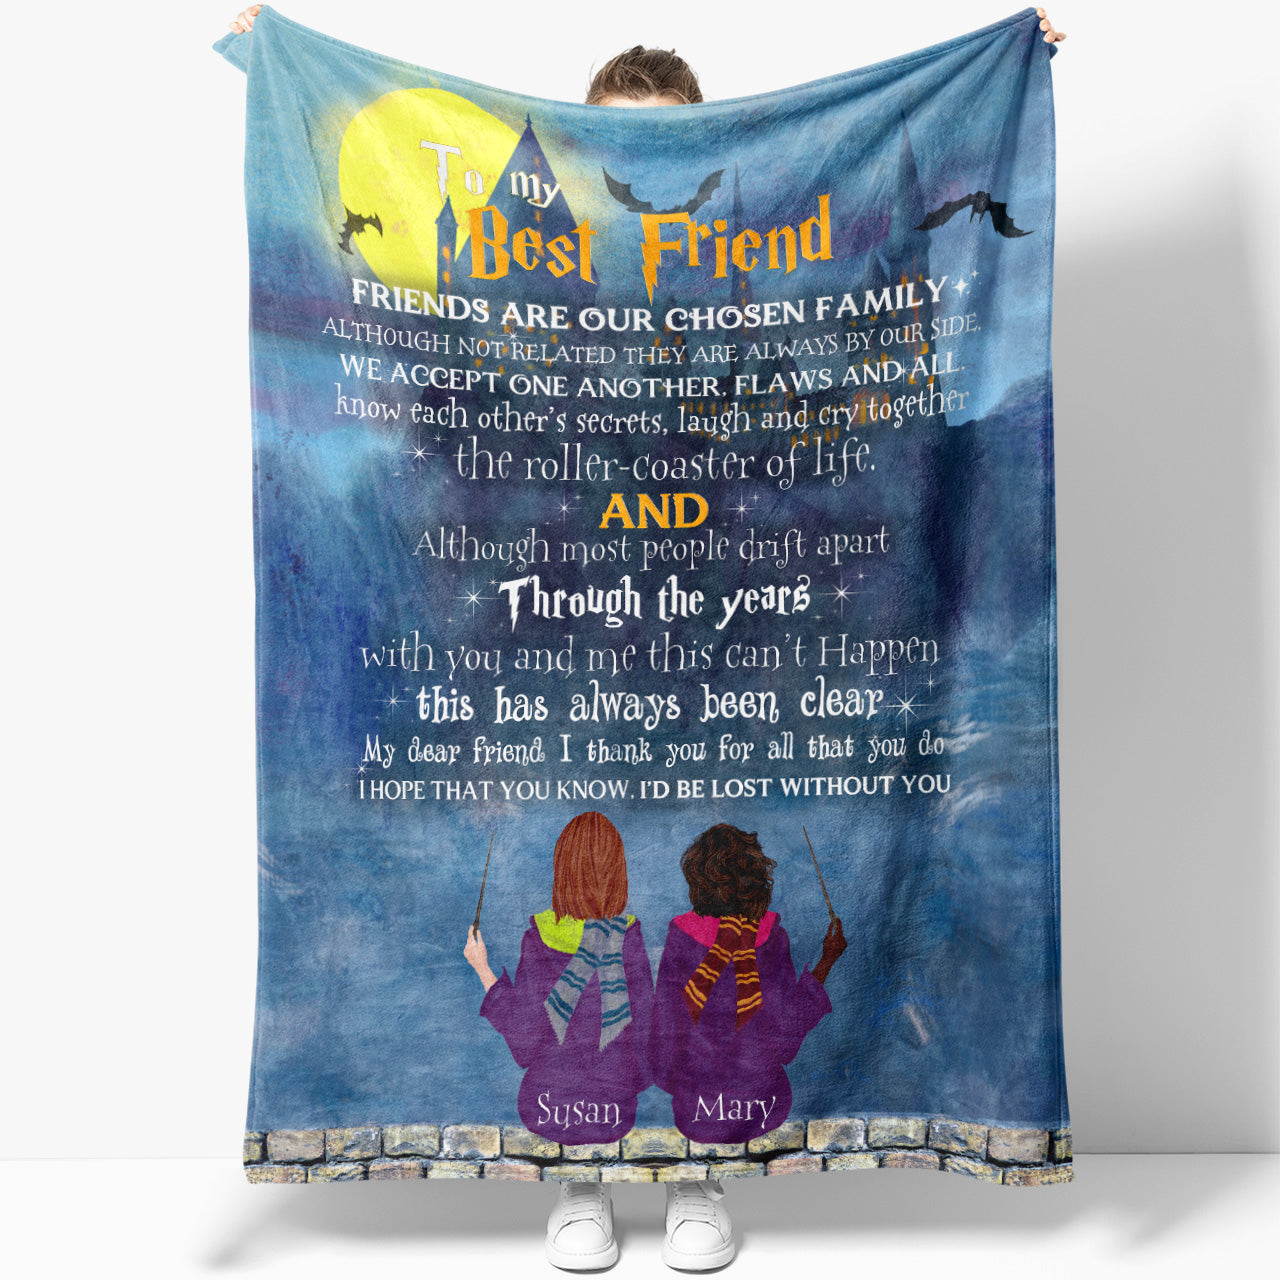 Wizard Blanket Gift Ideas for Best Friend, Custom Blanket Friends Are Our Chosen Family, Personalized Blanket for BFF